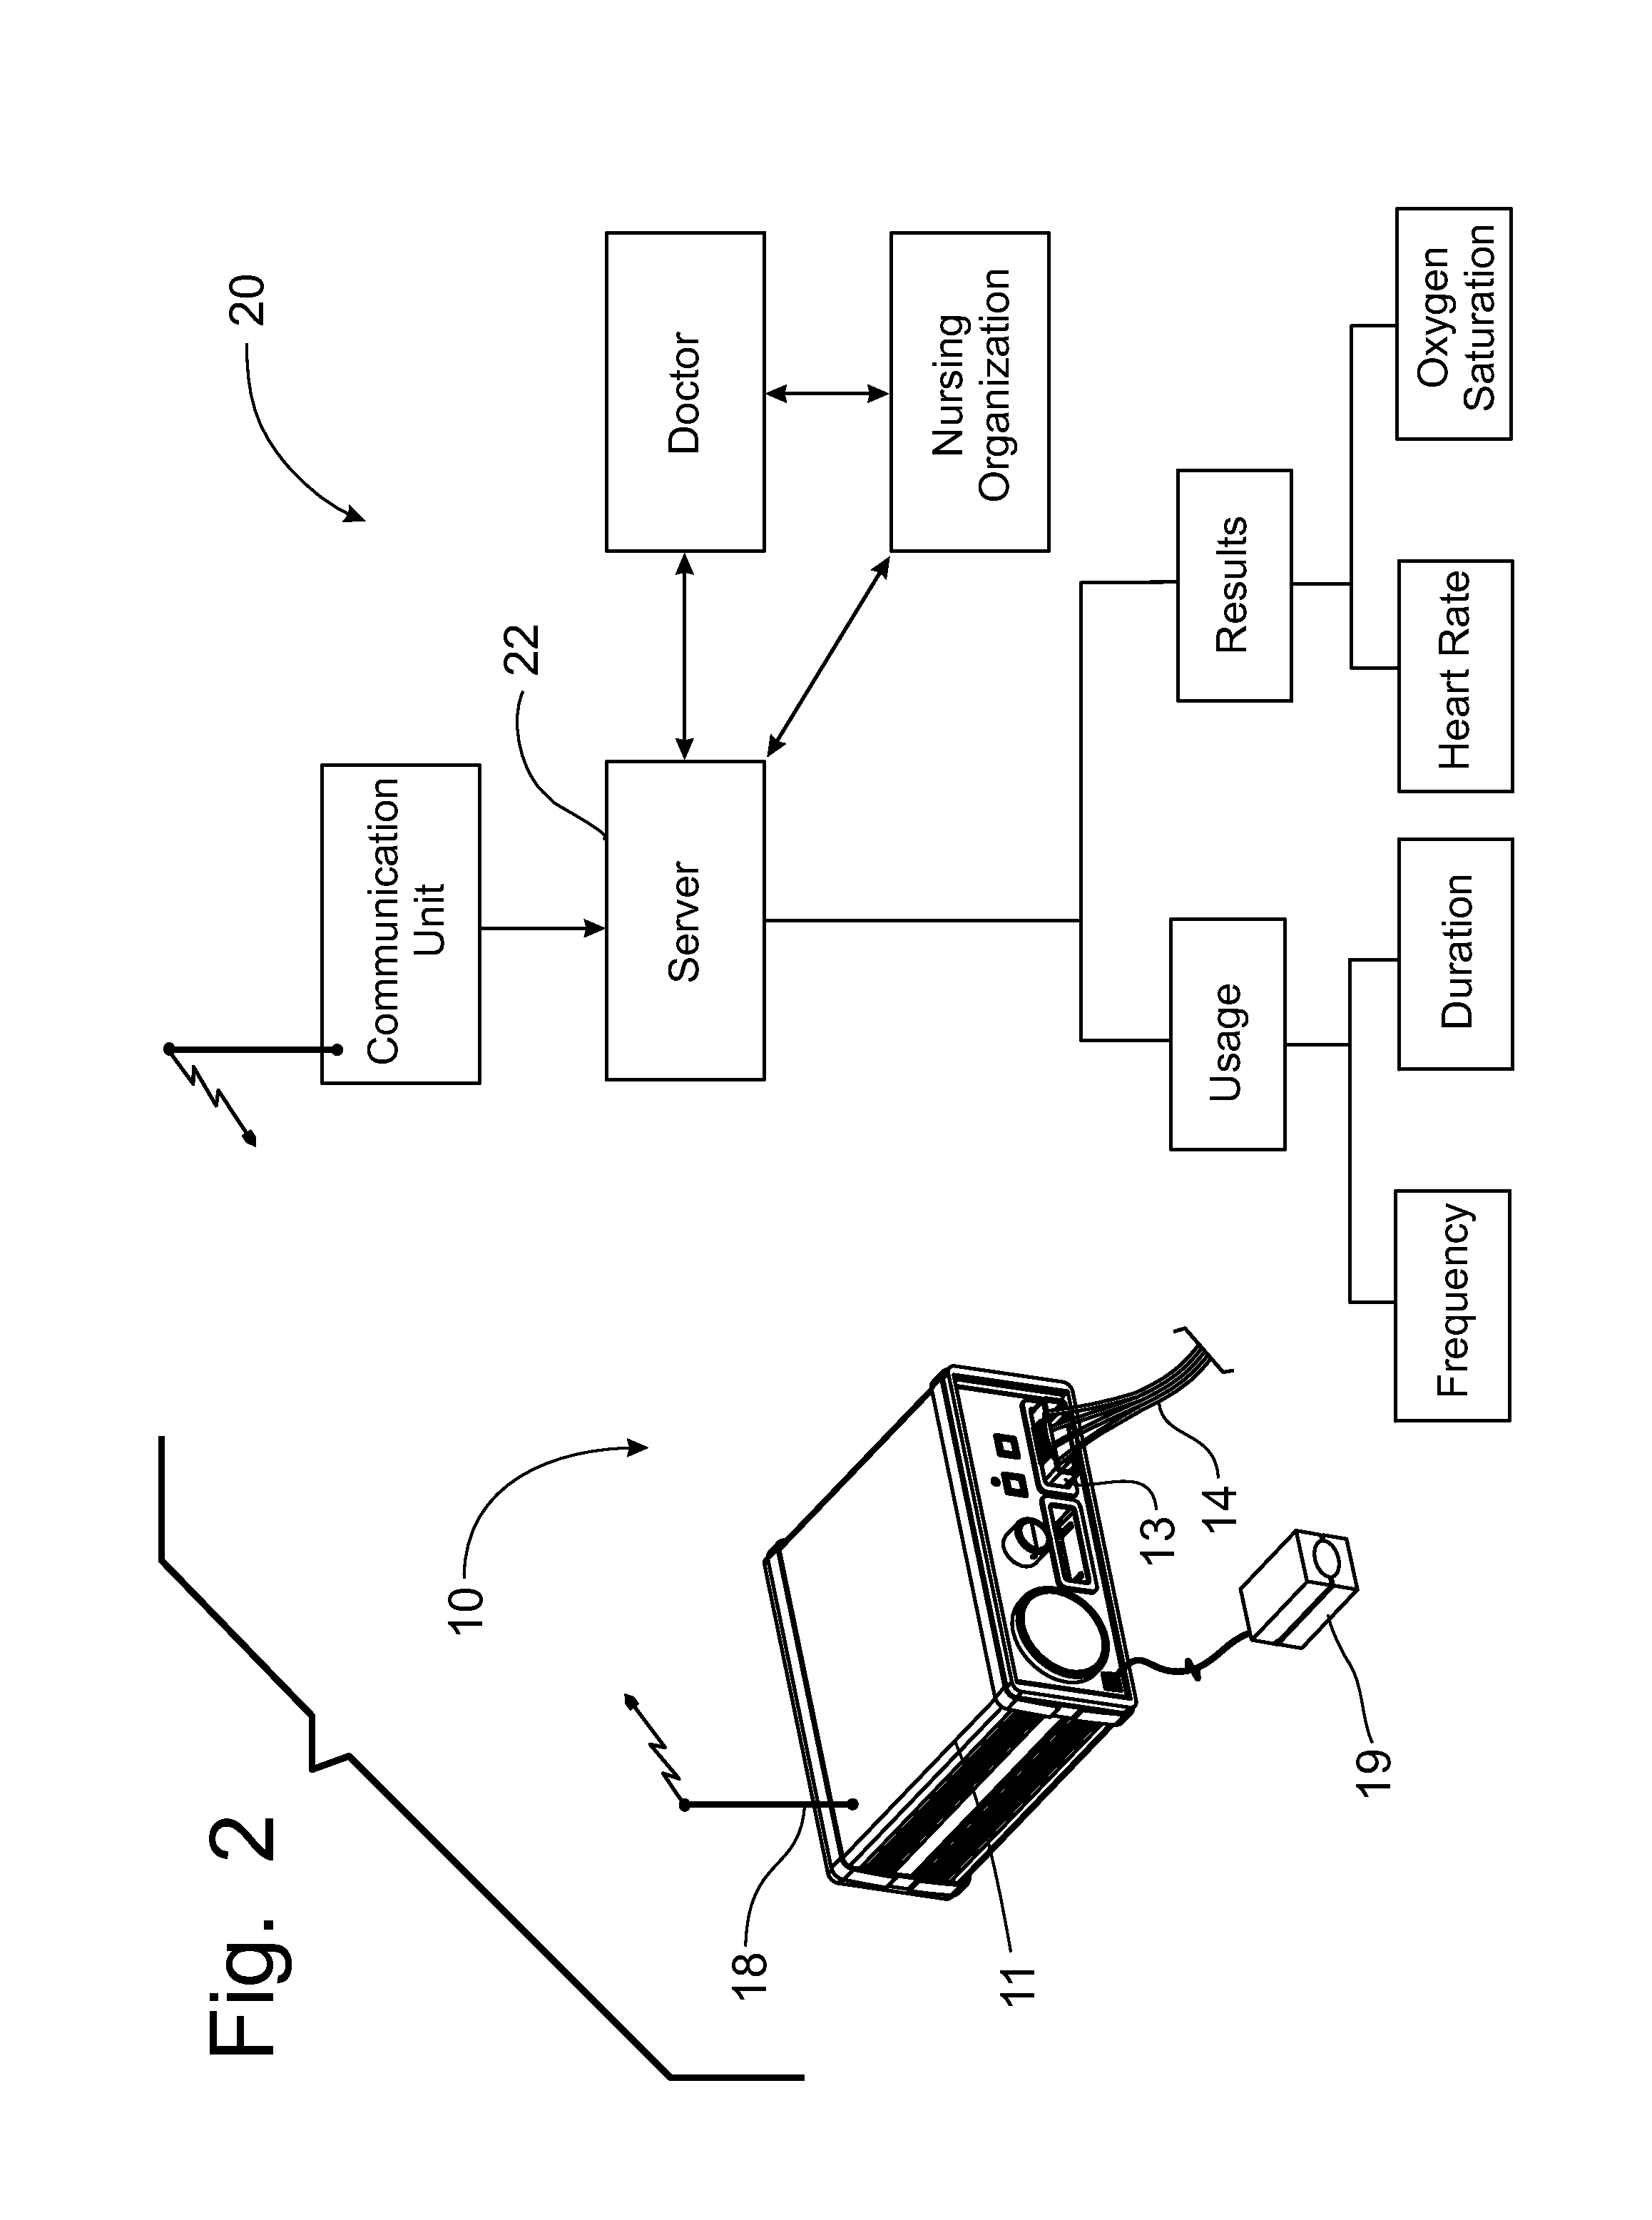 System for monitoring the use of medical devices